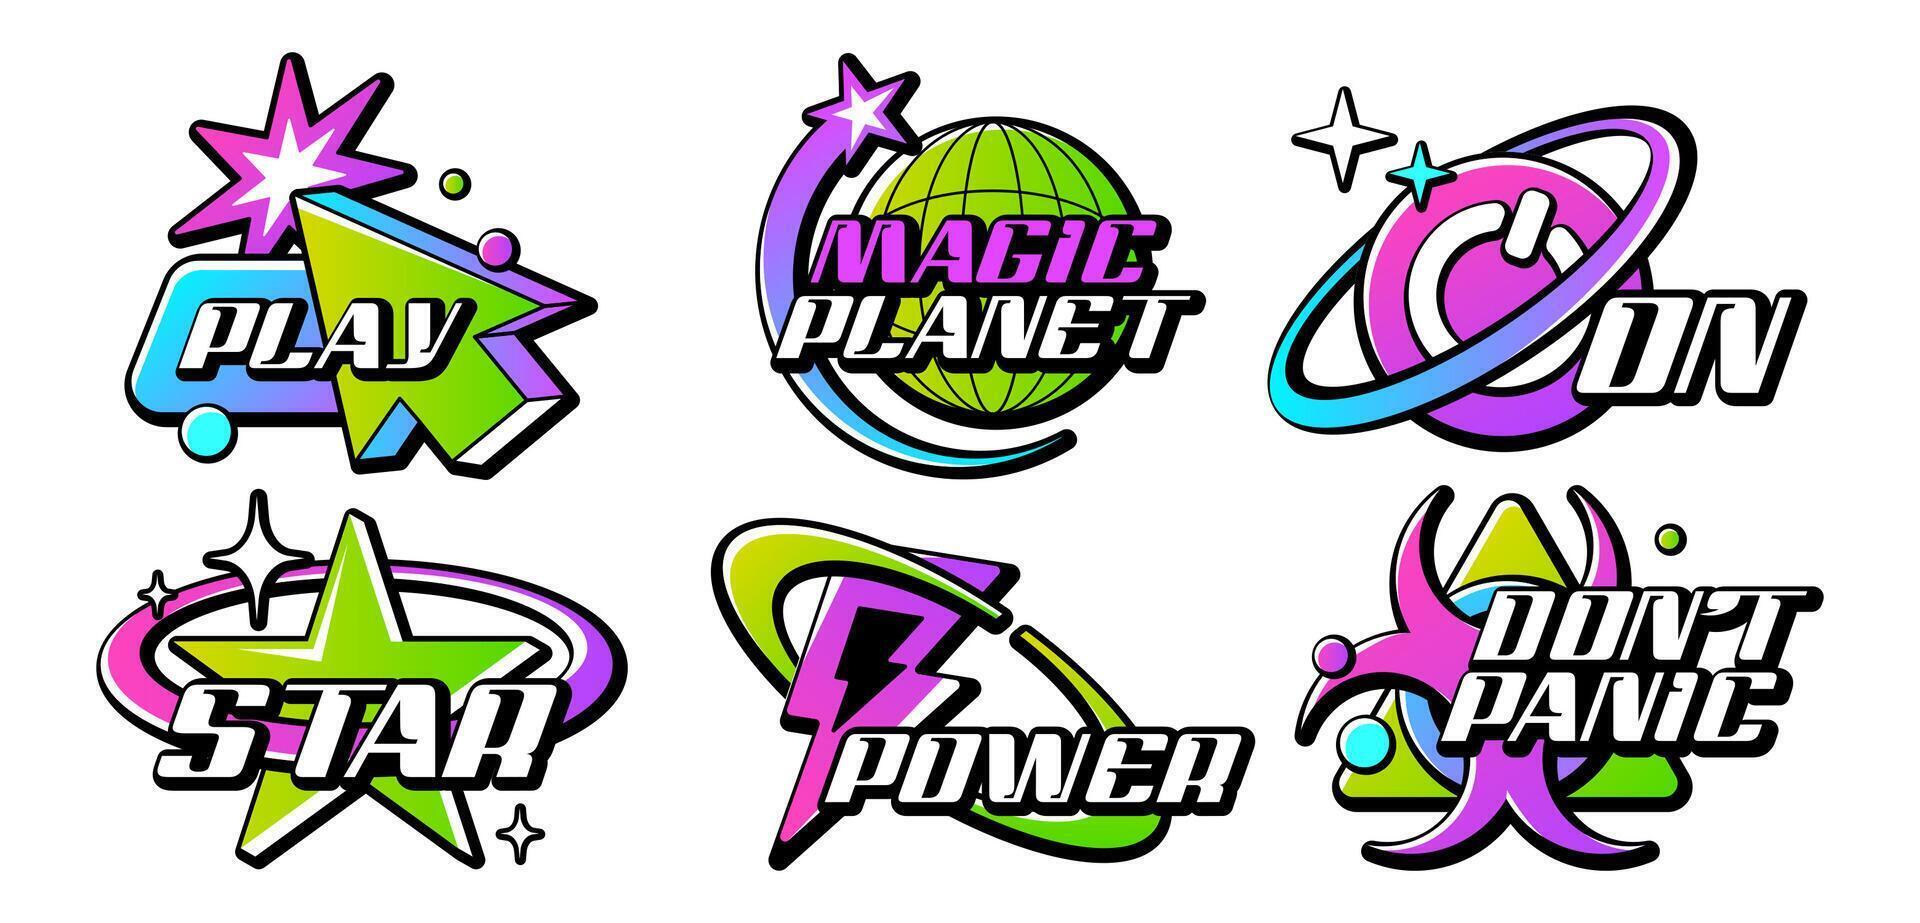 Retro Y2K logo set. Acid gradient color lettering logos for shirt, streetwear. Sticker, badges, slogan typography vector icon design illustration with star, button, planet earth. Futuristic elements